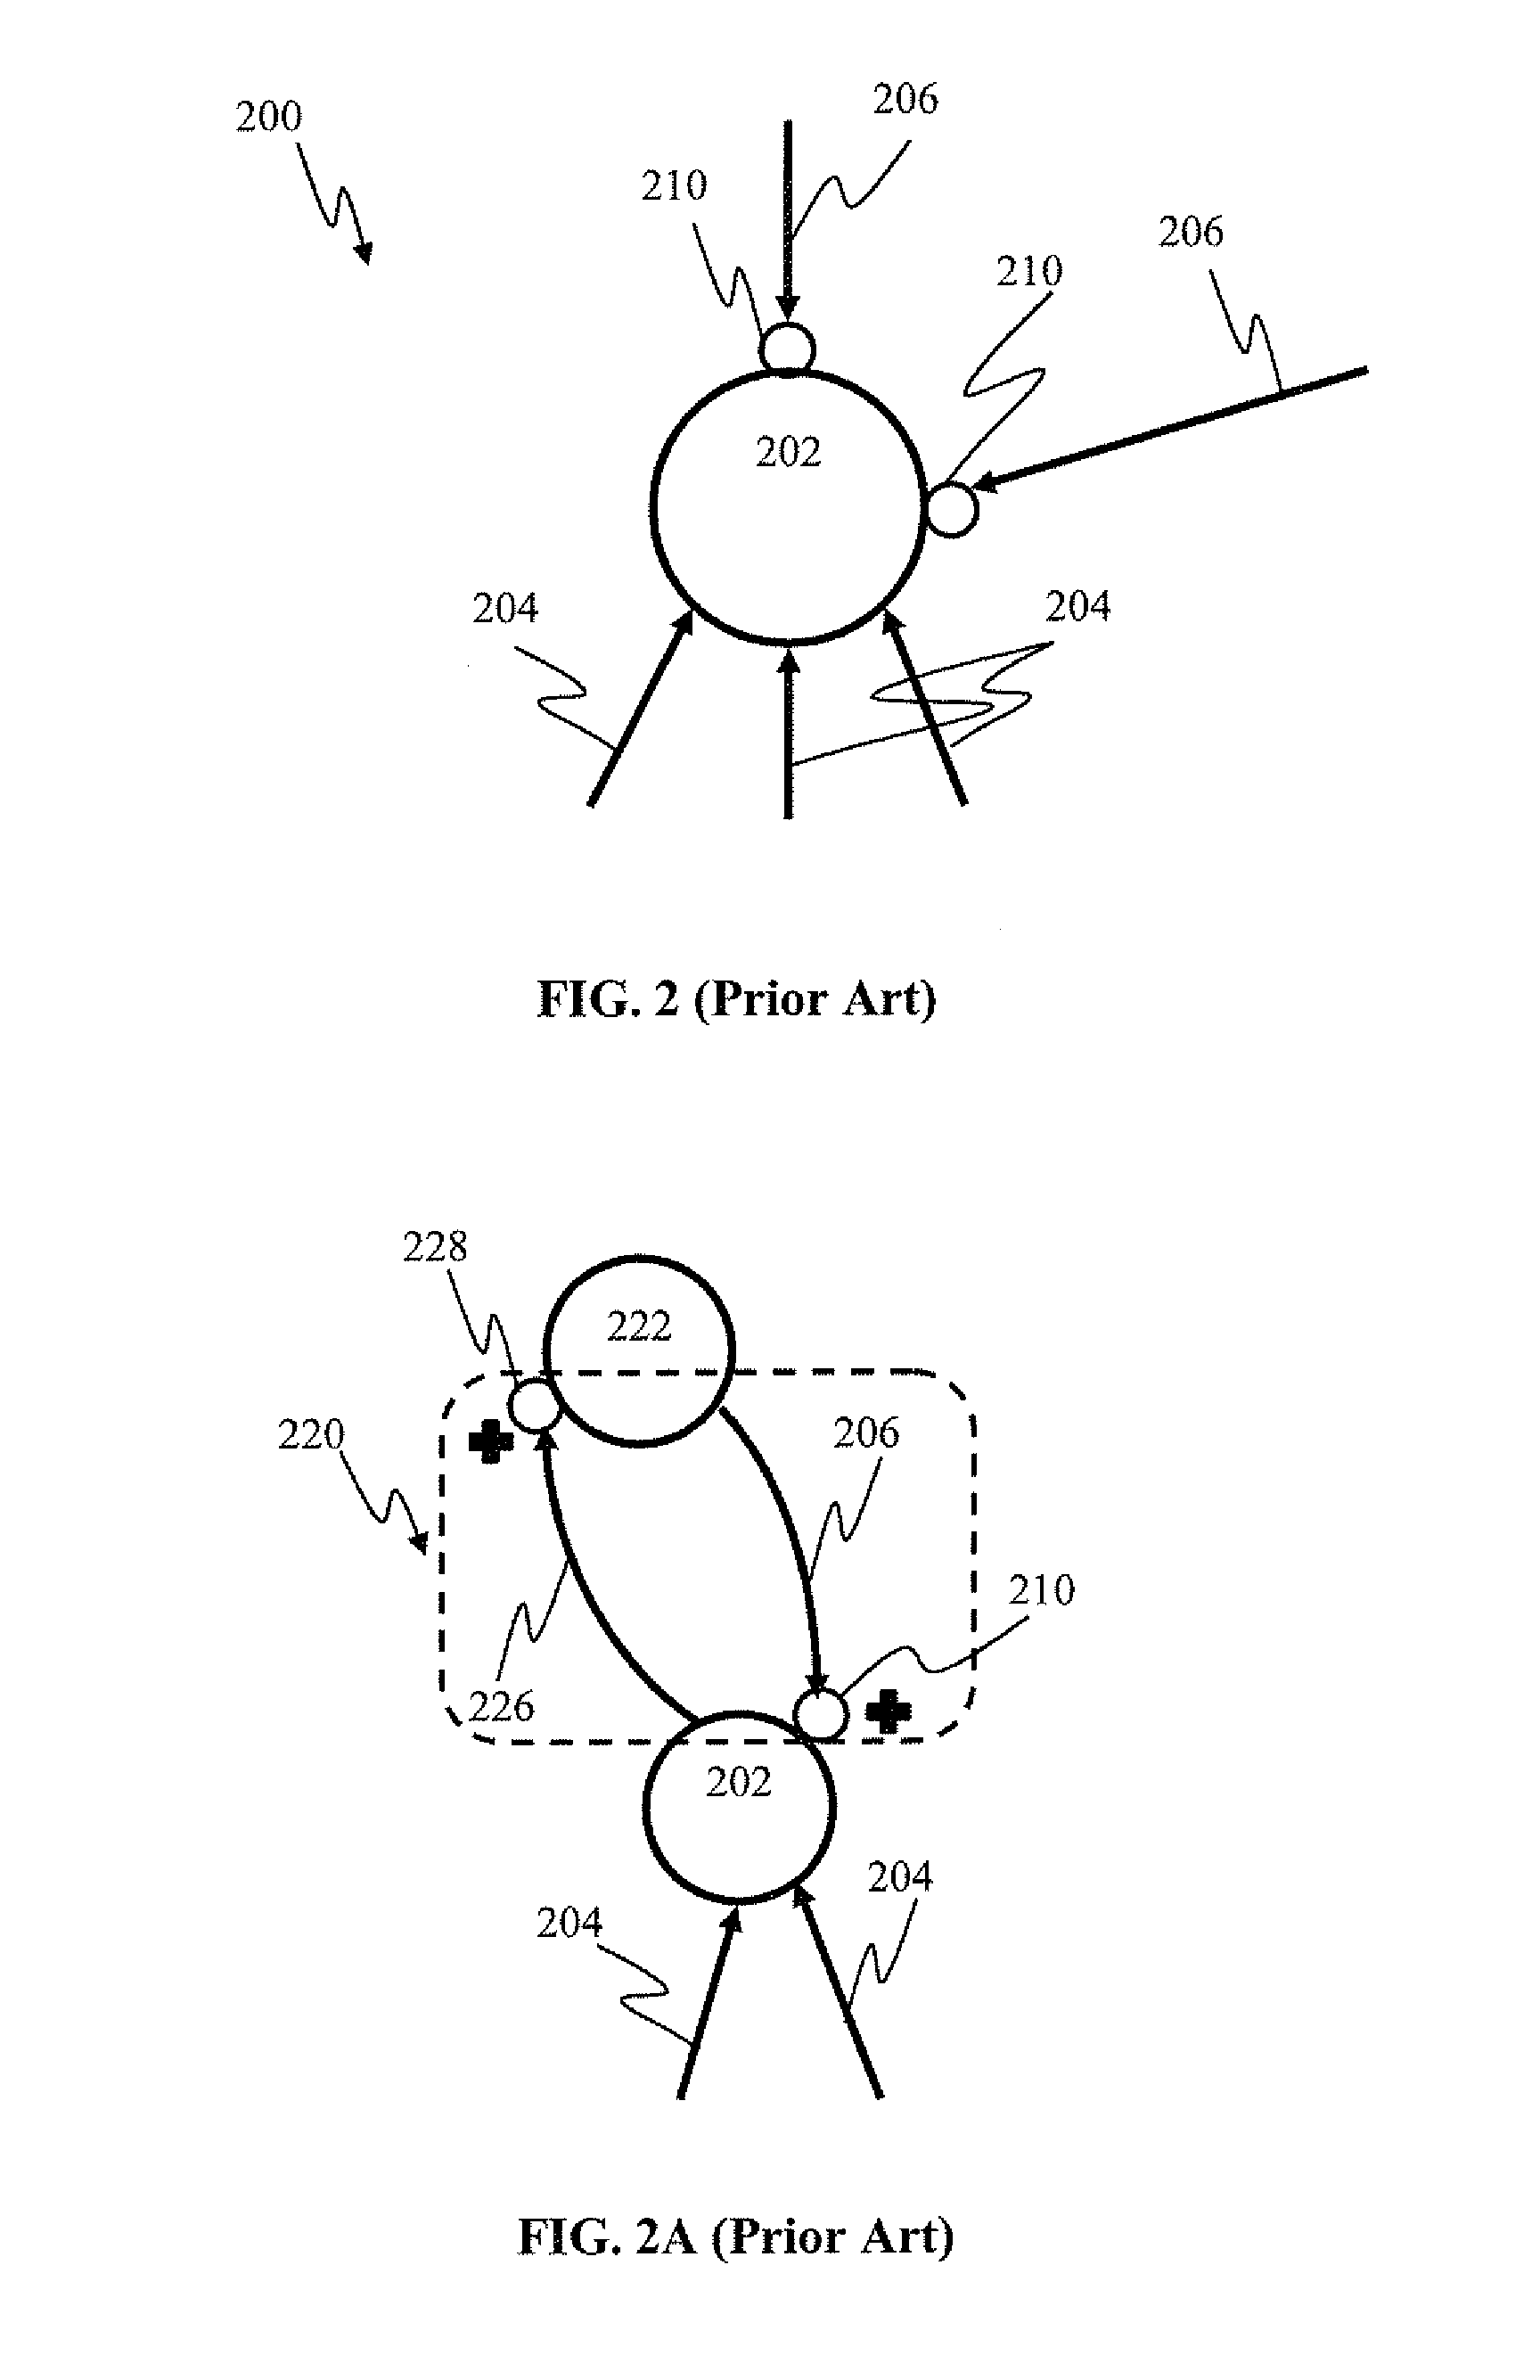 Sensory input processing apparatus in a spiking neural network